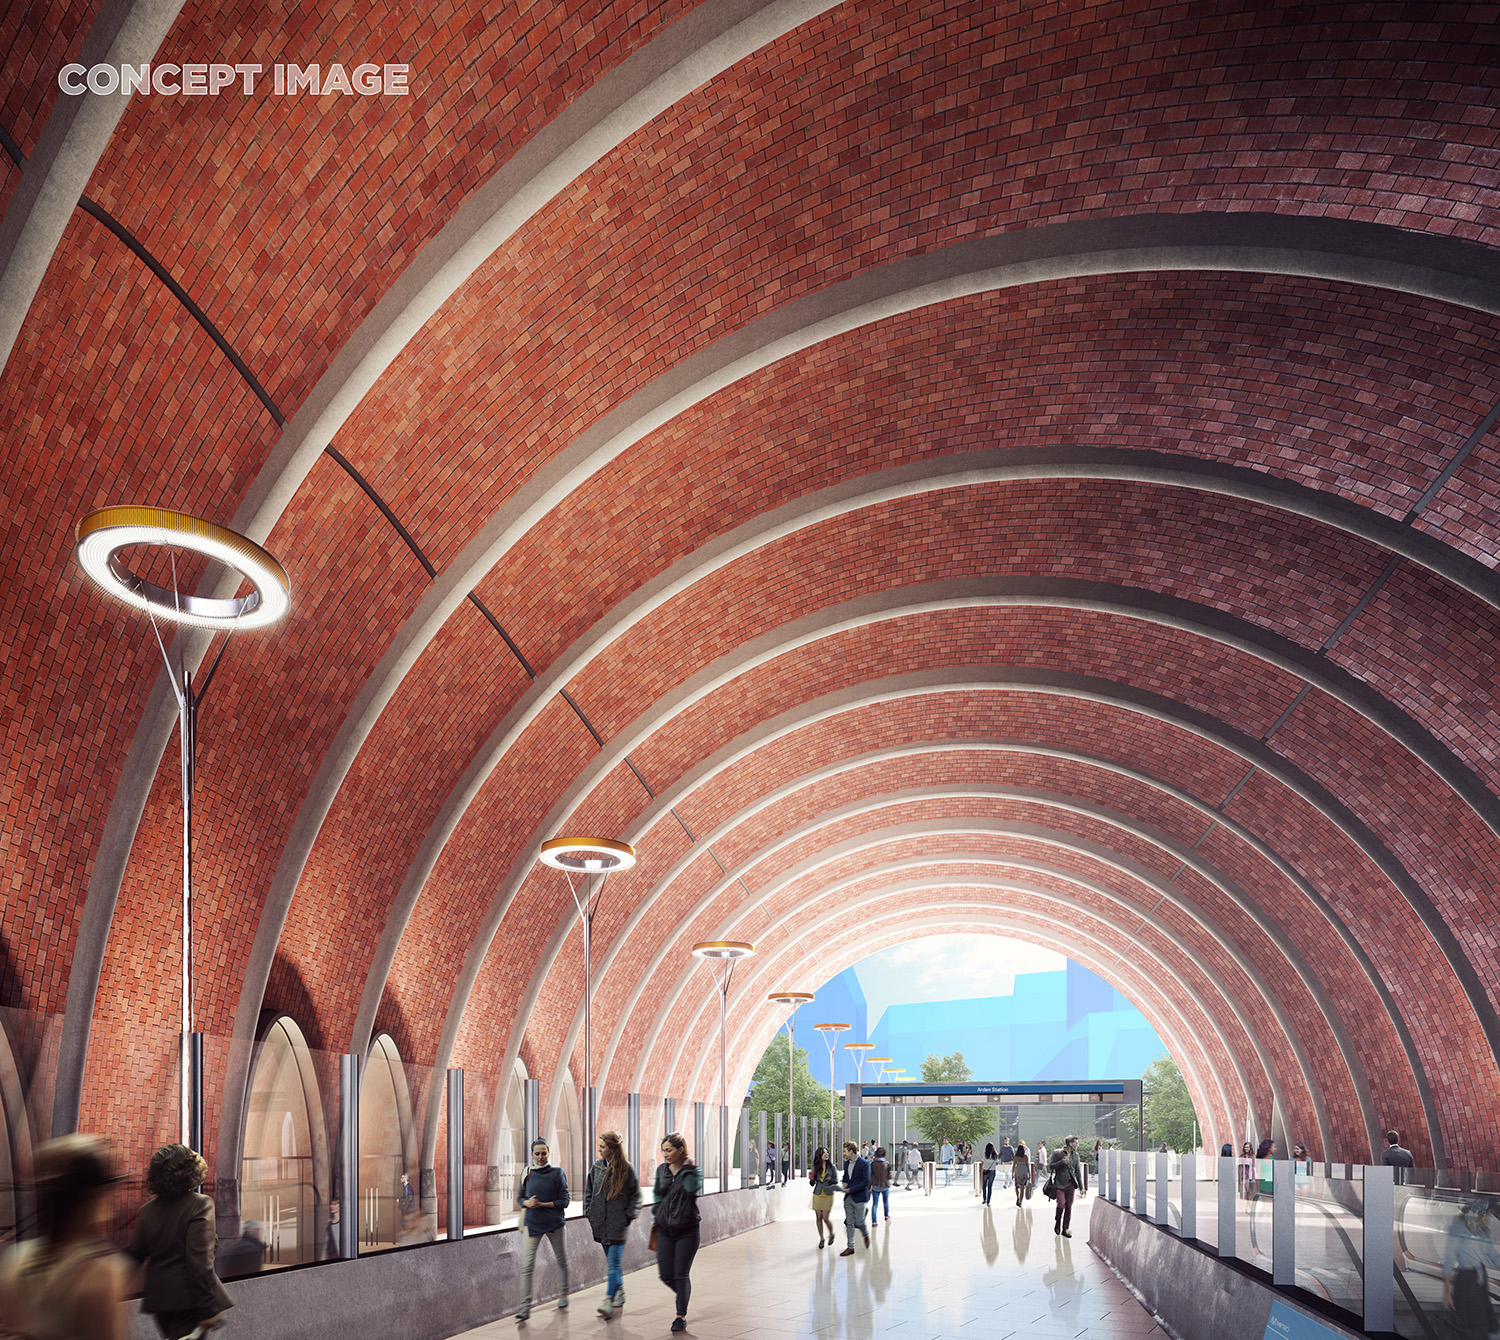 Concept image showing the inside of the station entrance